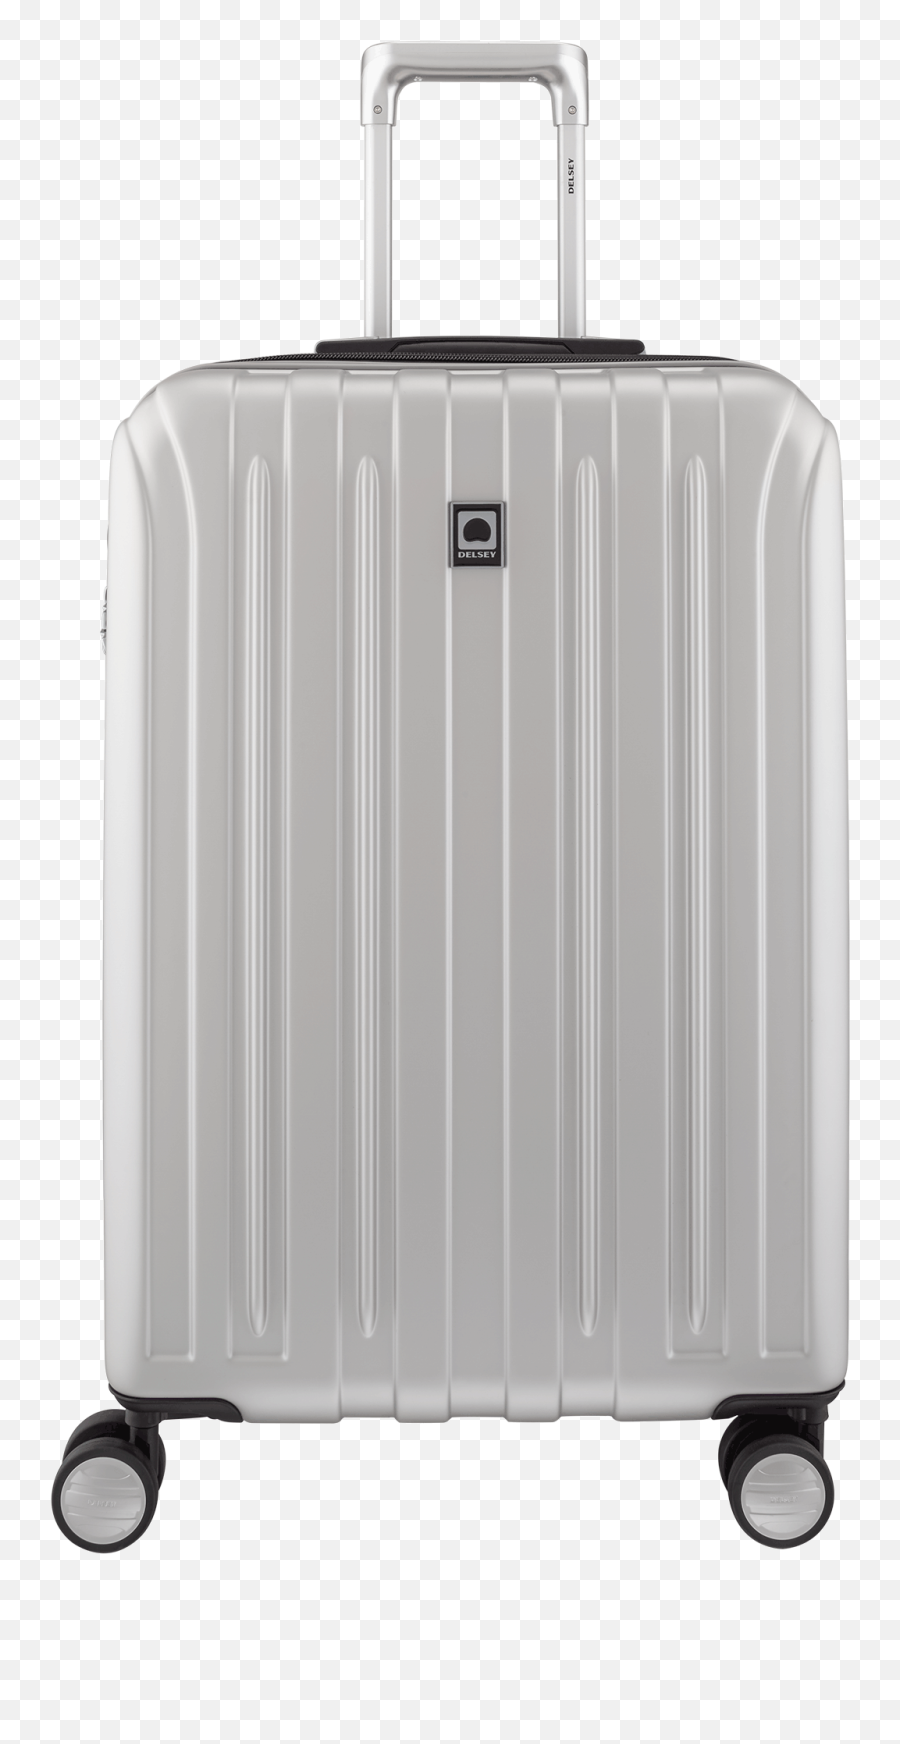 Luggage Png Image For Free Download - Suitcase Png Free,Suitcase Png